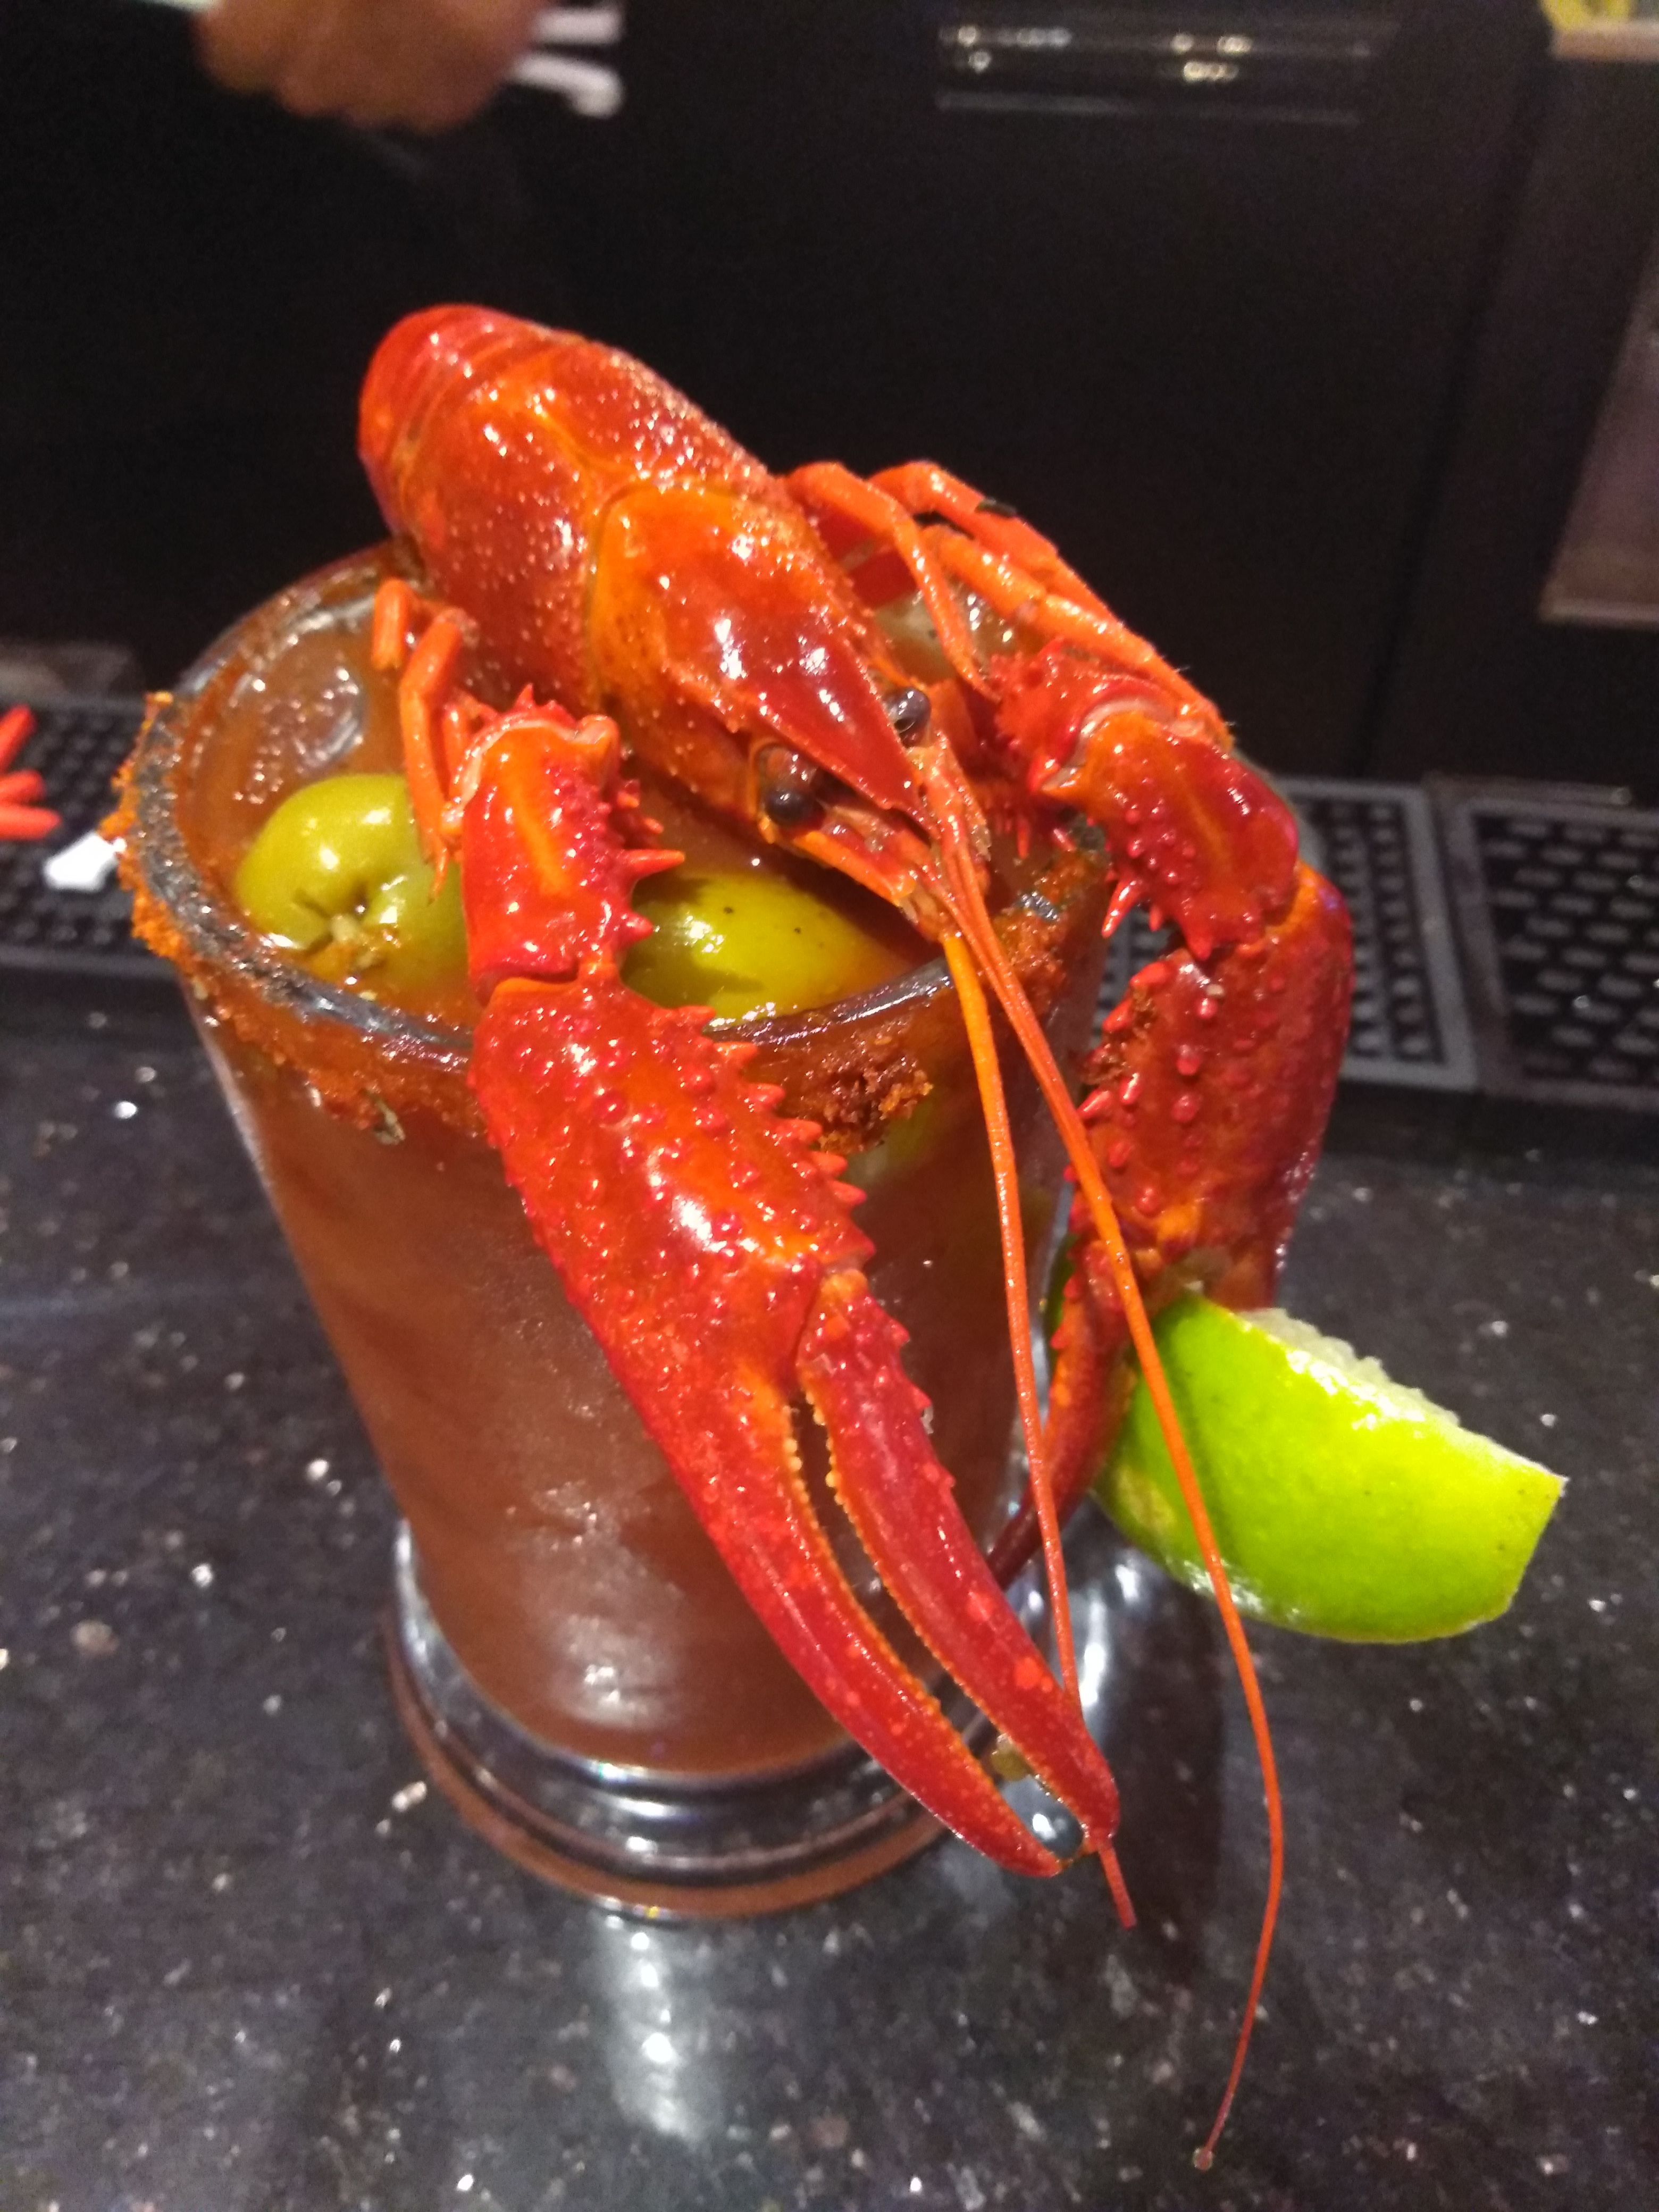 The Crawfish Bloody Mary at the Storming Crab in Clarksville, IN.